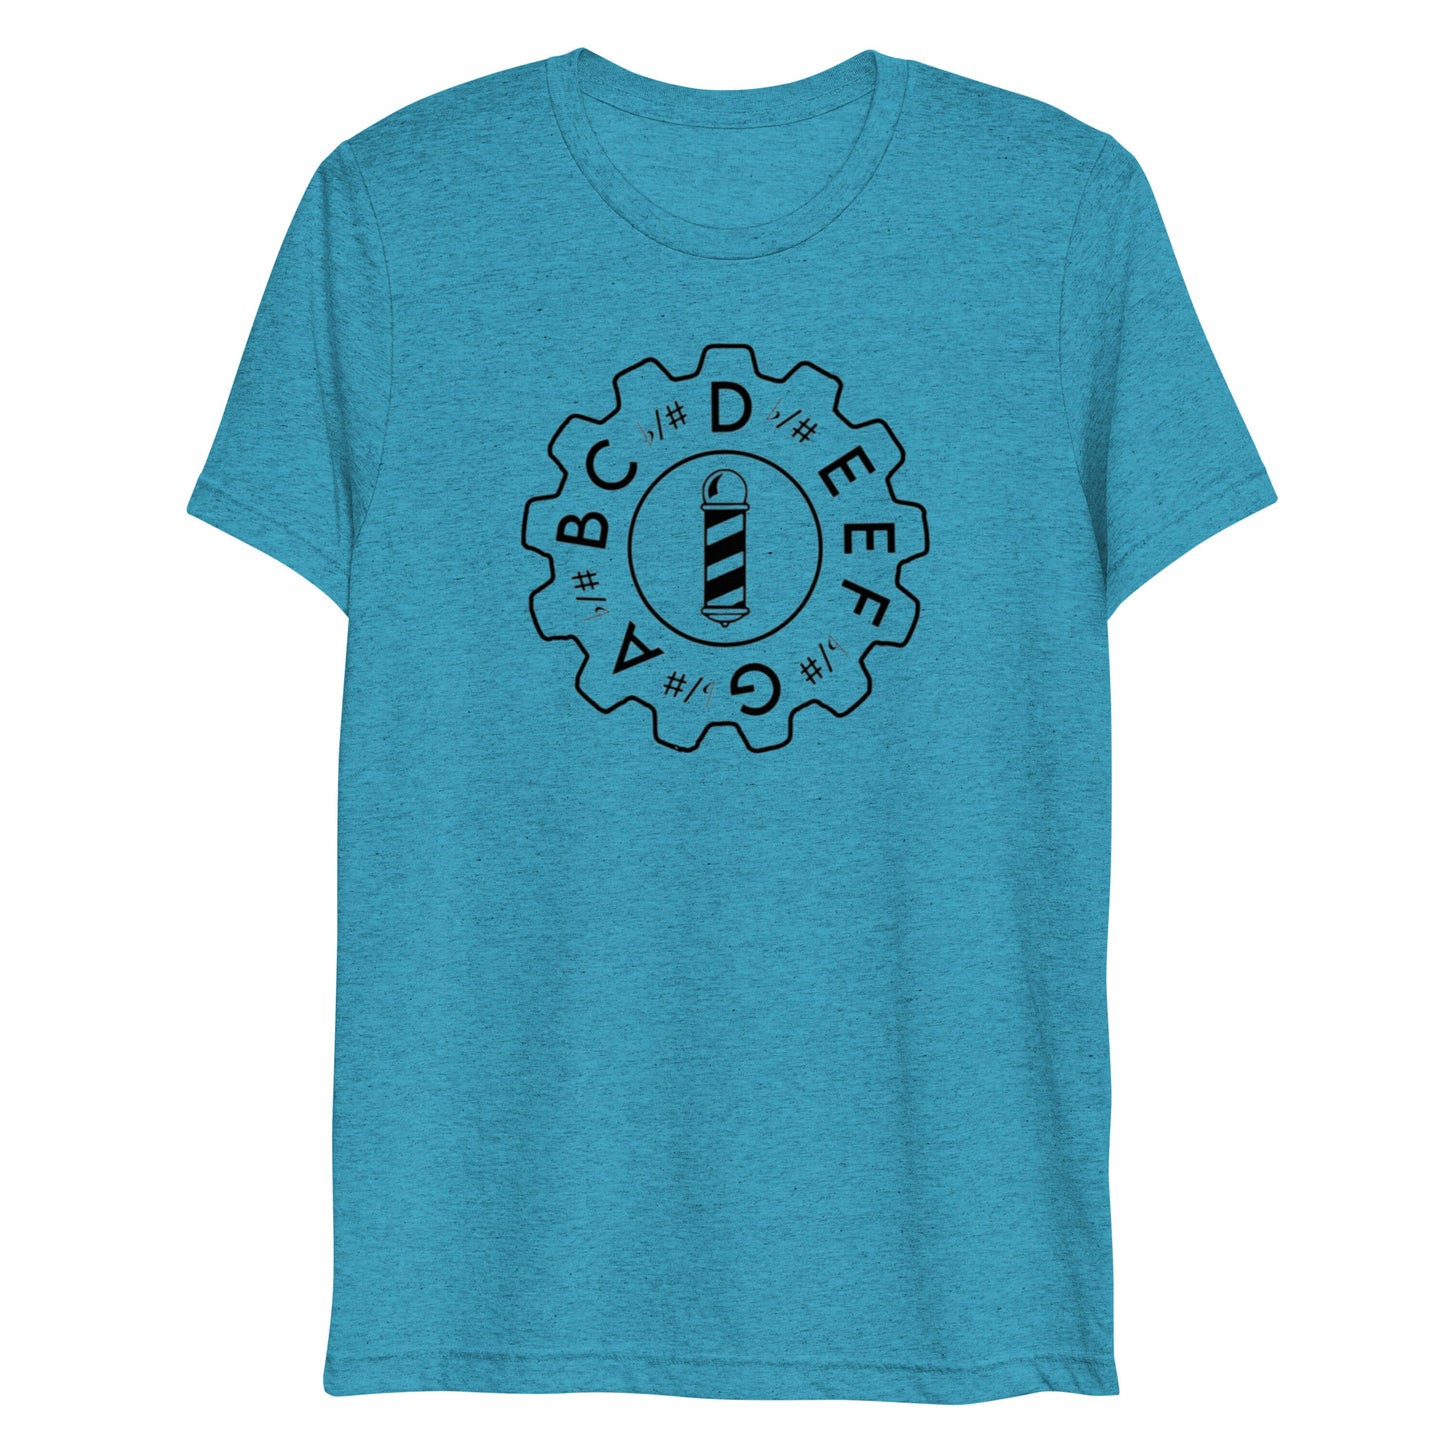 Tombo Inspired Pitch pipe - Super soft Short sleeve t-shirt